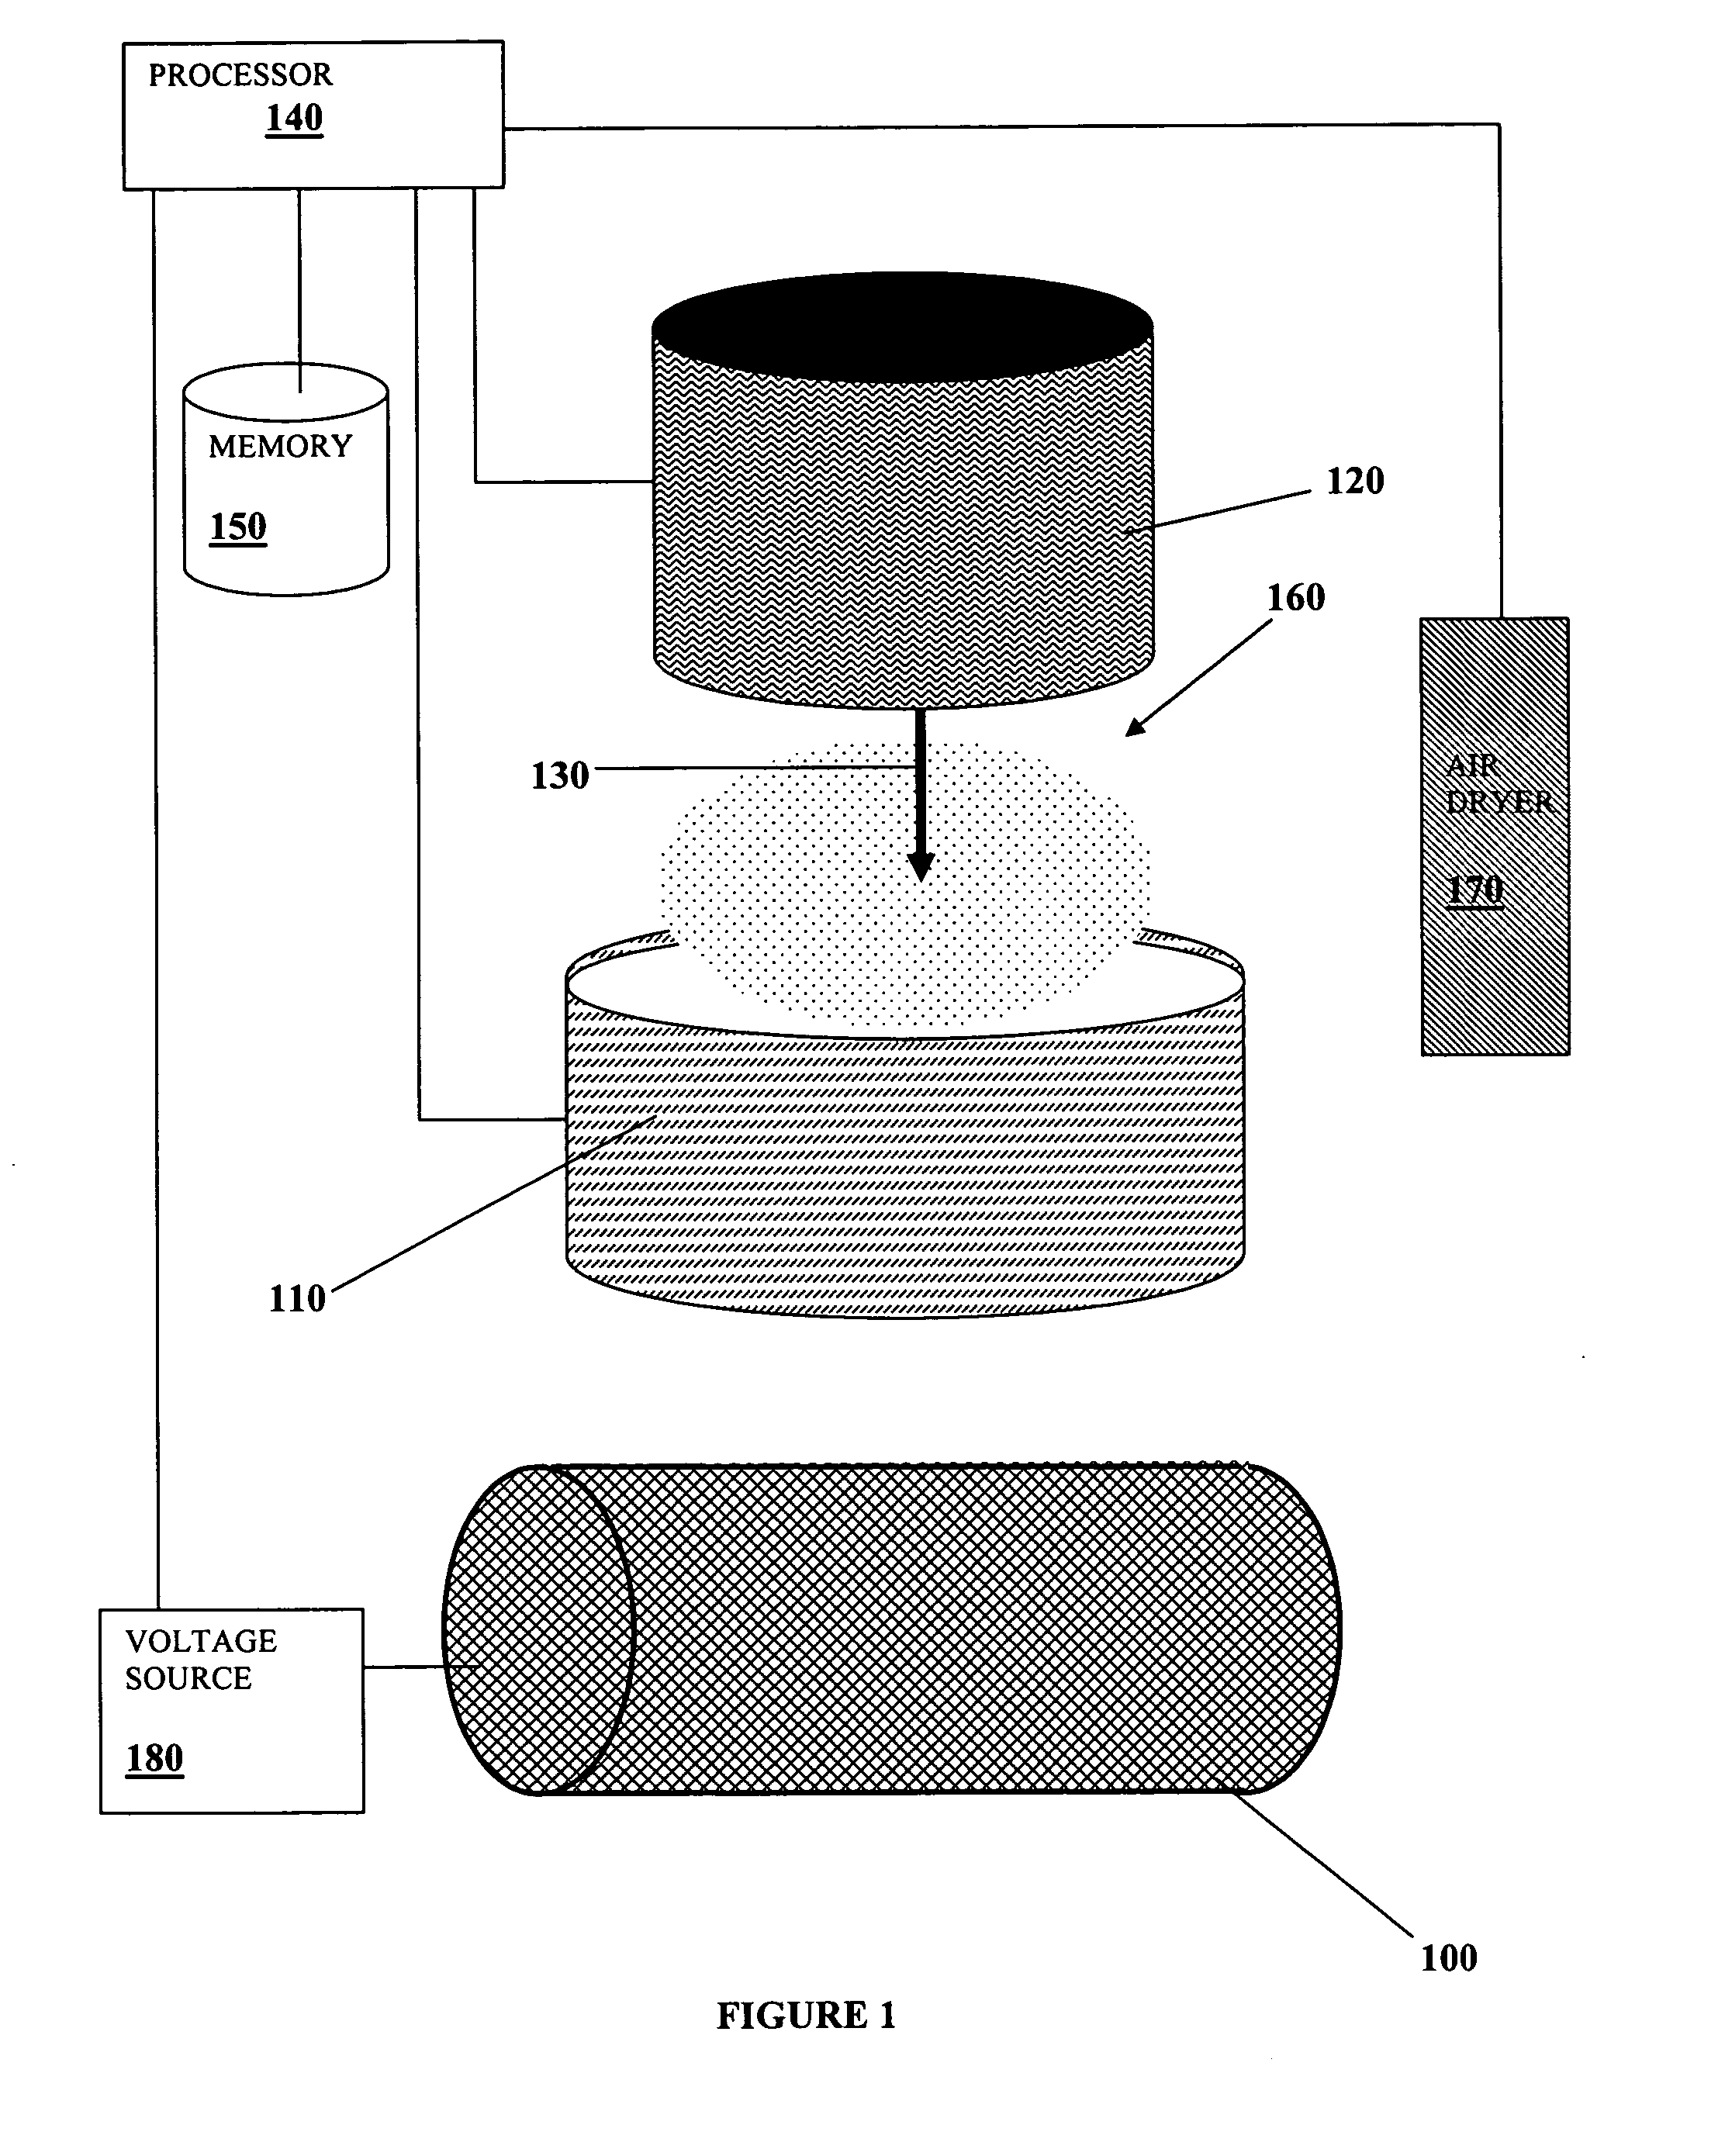 Method of coating a medical device utilizing an ion-based thin film deposition technique, a system for coating a medical device, and a medical device produced by the method